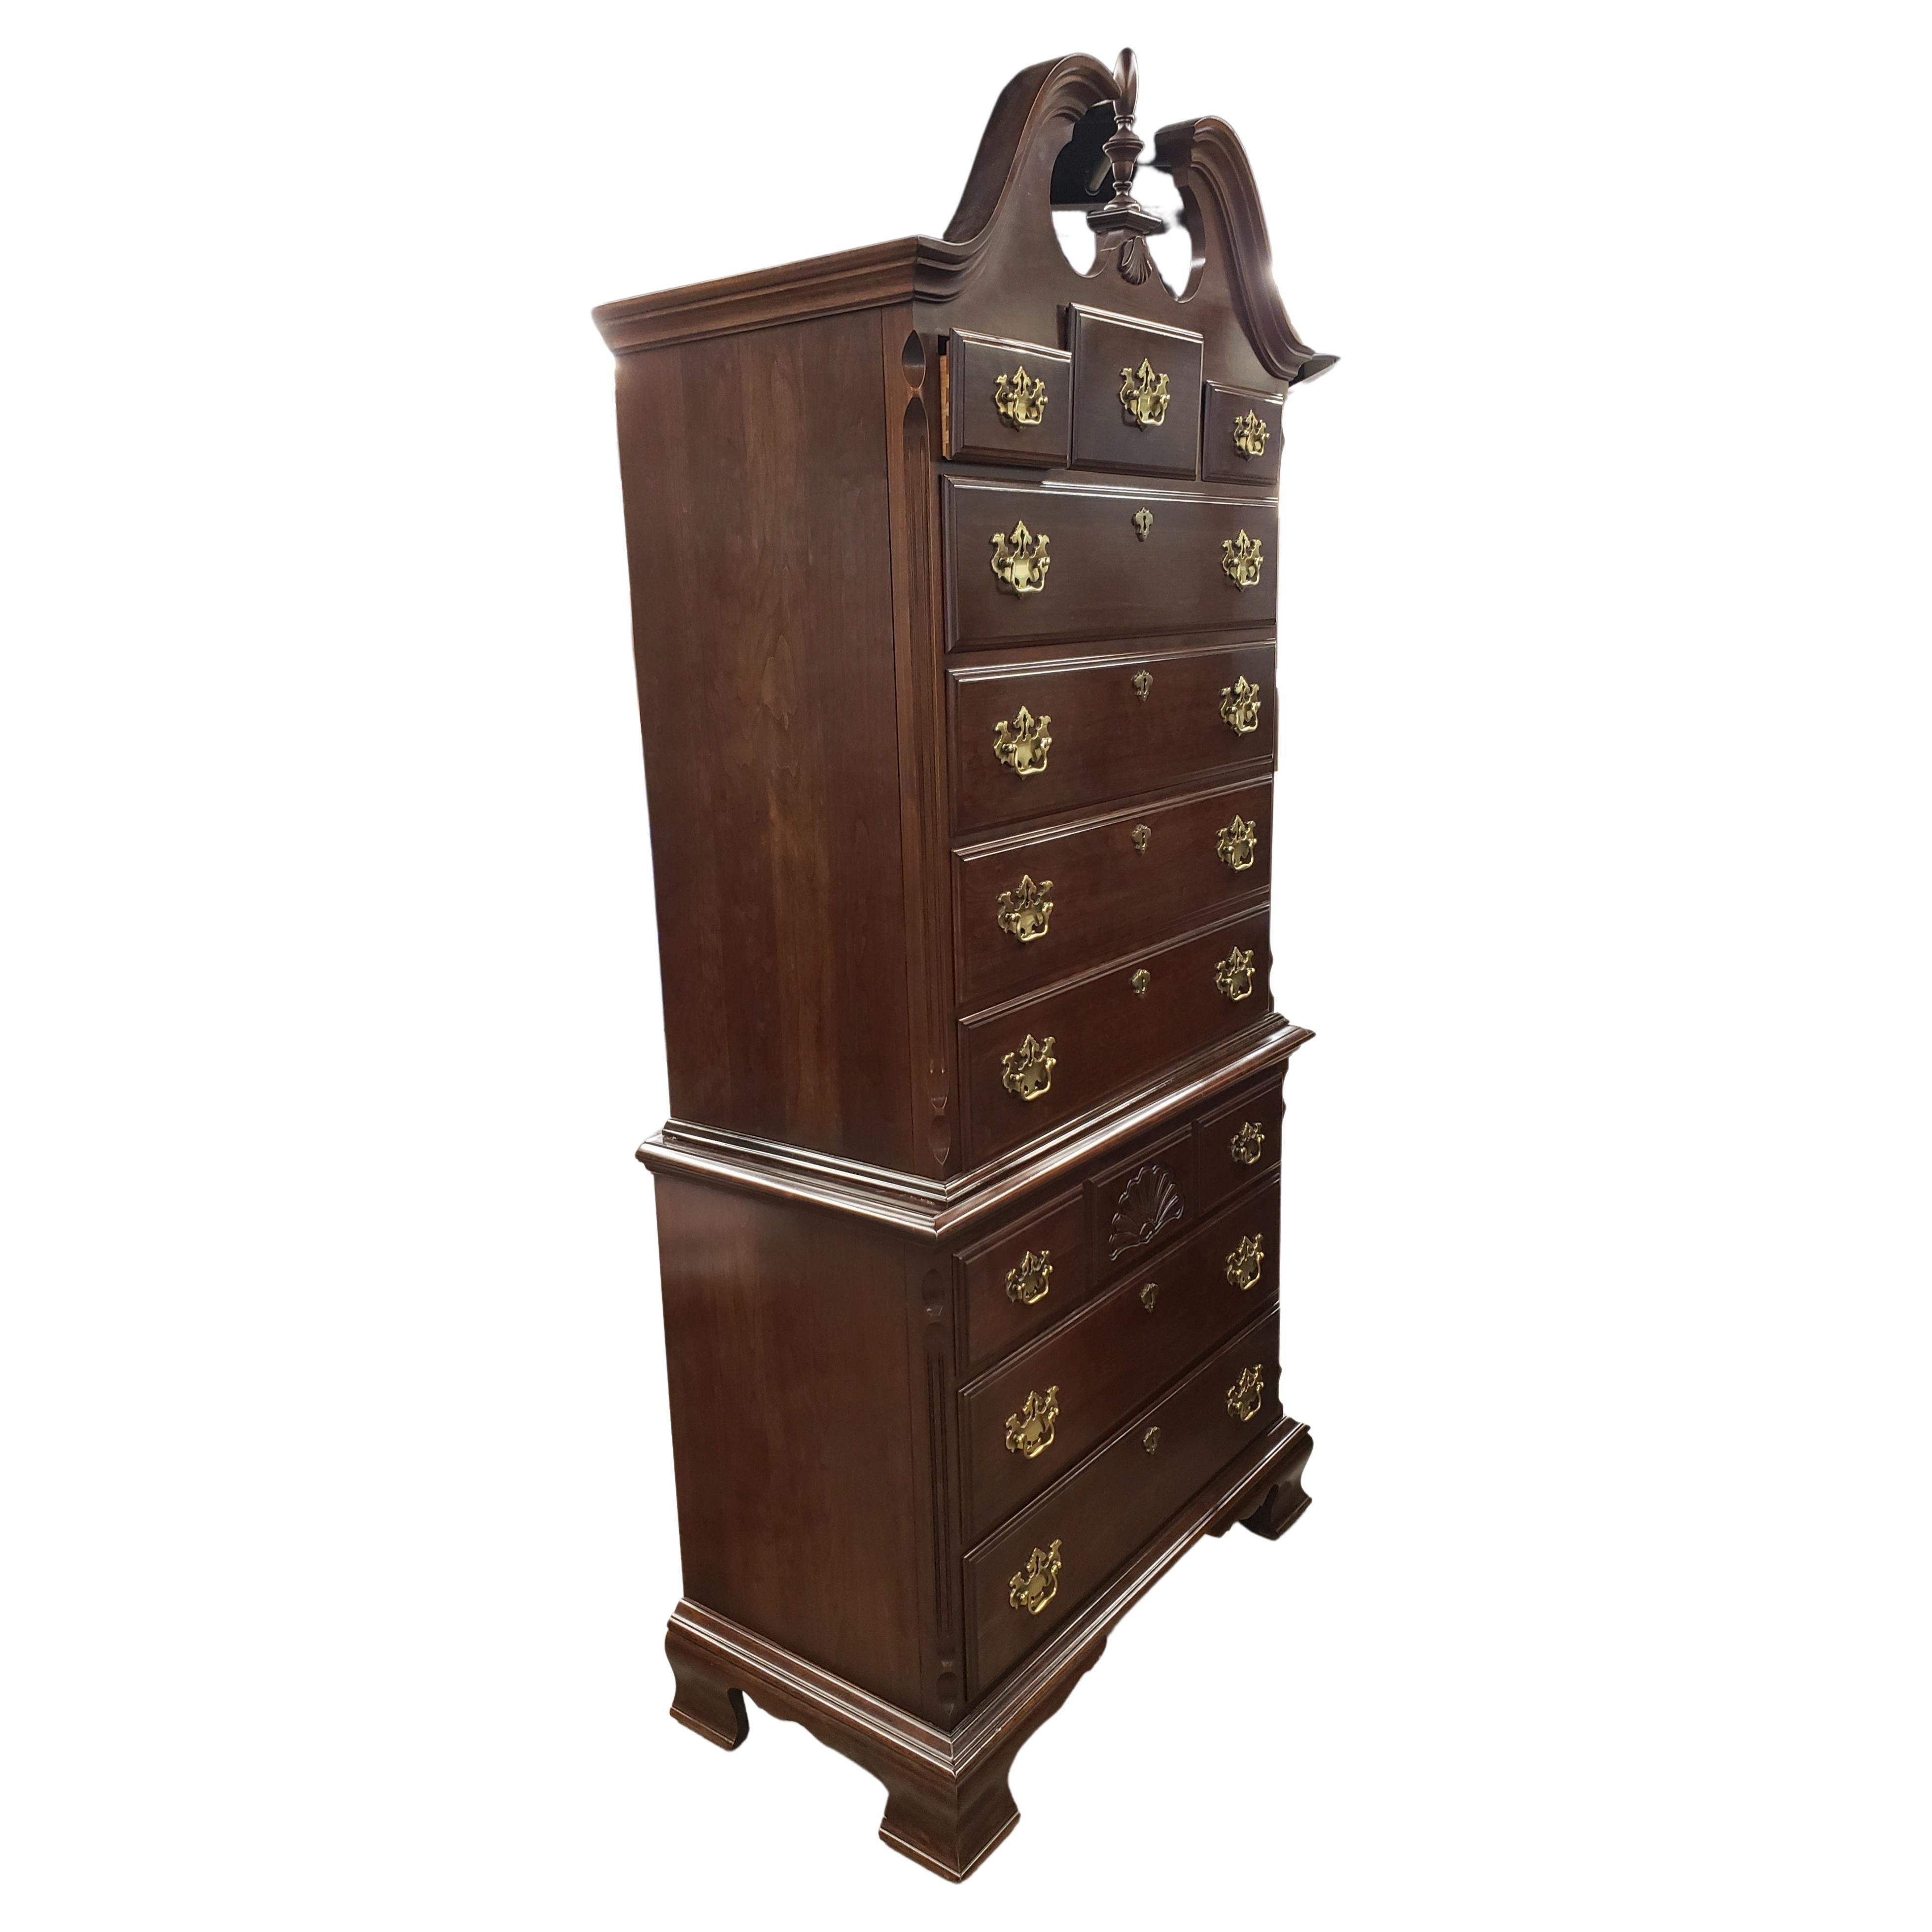 A rare Pennsylvania House Chippendale Chest on Chest with Bonnet Top chest of drawers in excellent vintage  condition. Very clean in and out. All 10 drawers are dovetailed, including the top 3 drawers. Measures 78 3/8